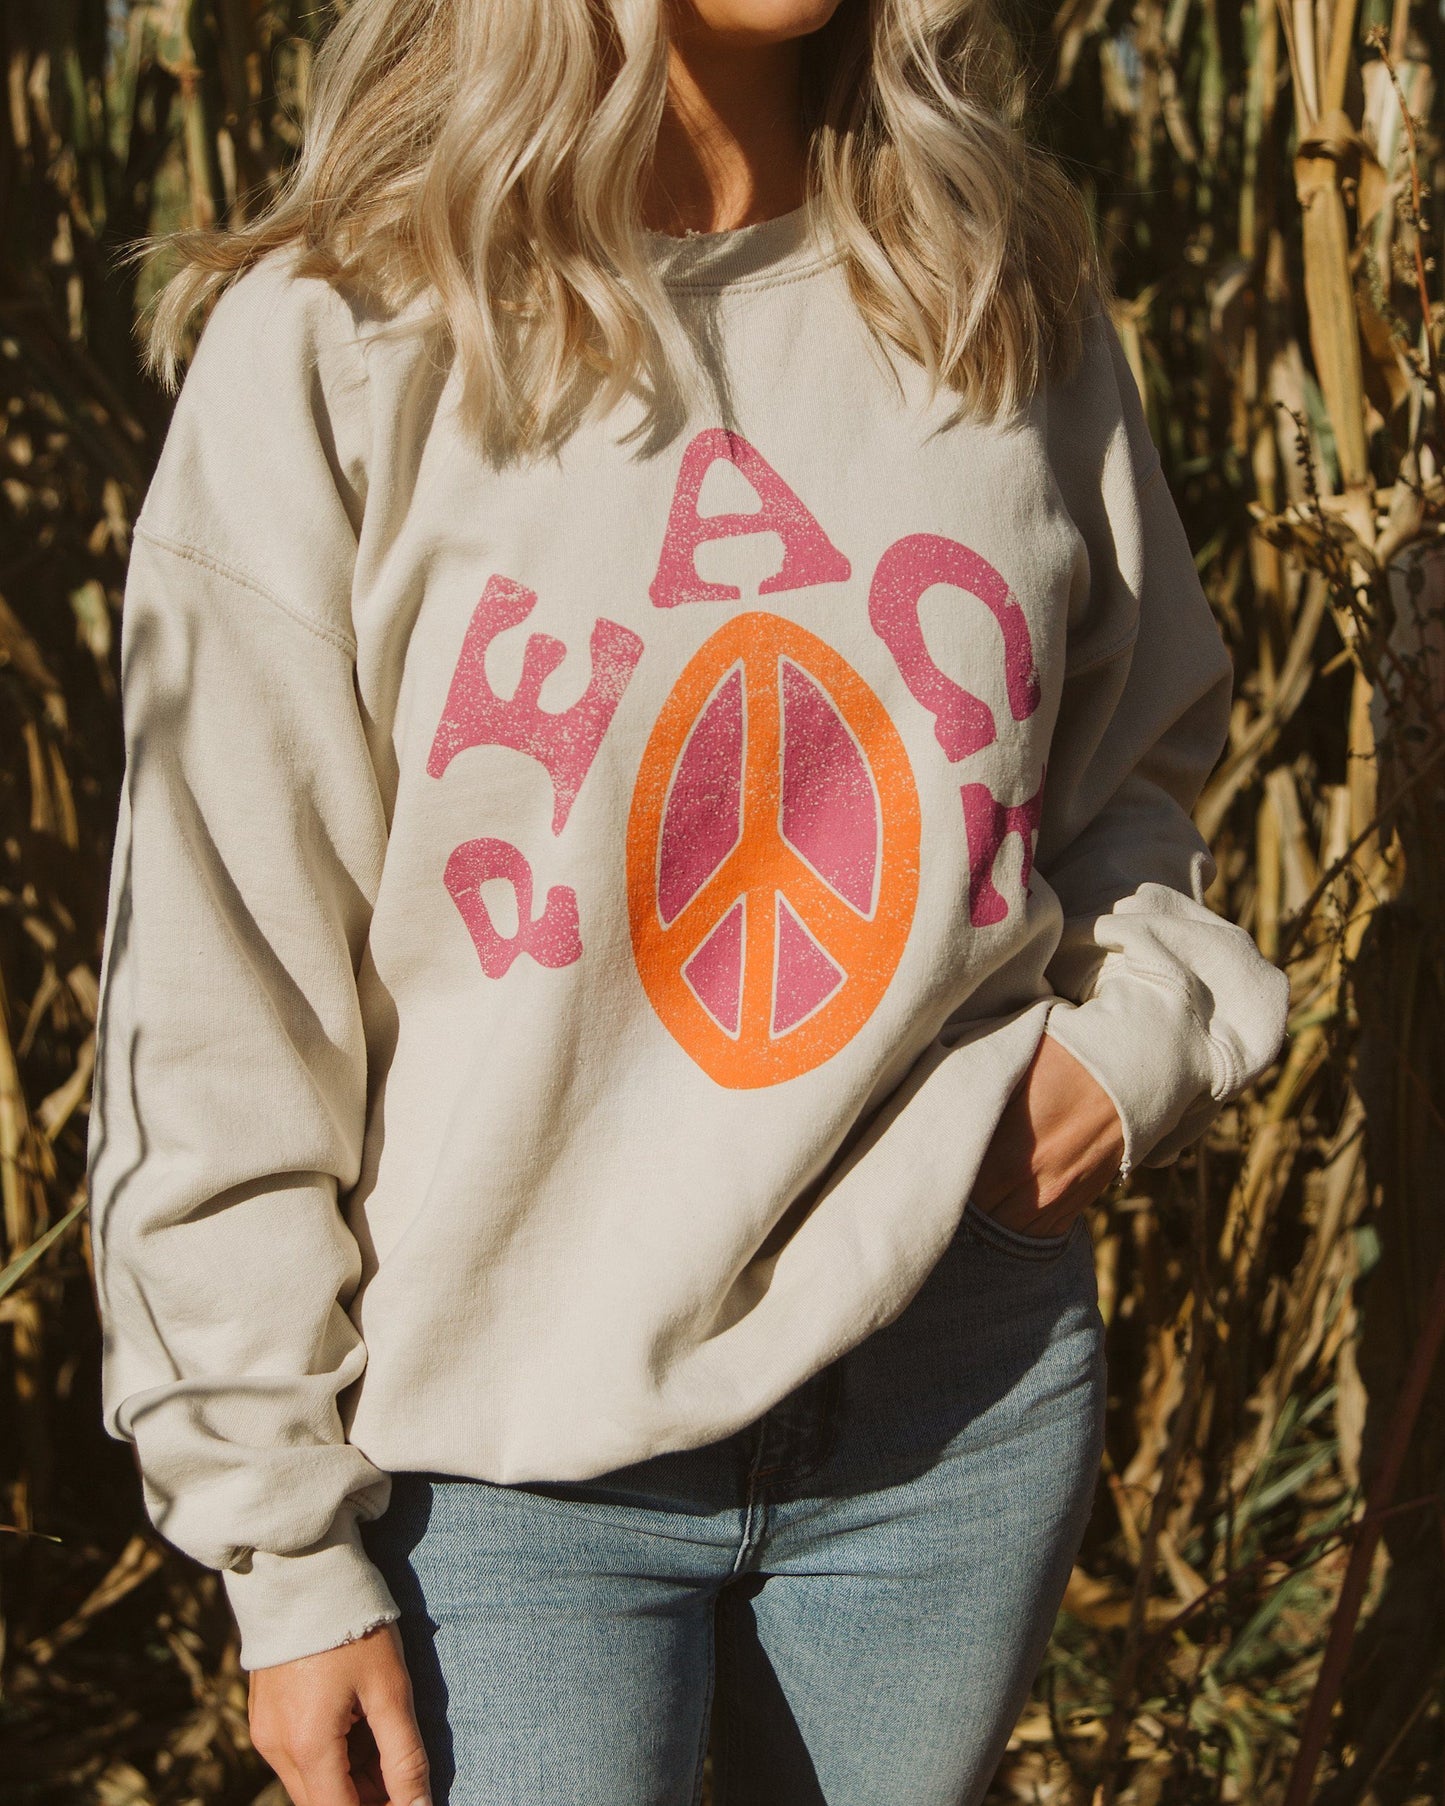 Peace Sign Thrifted Sweatshirt